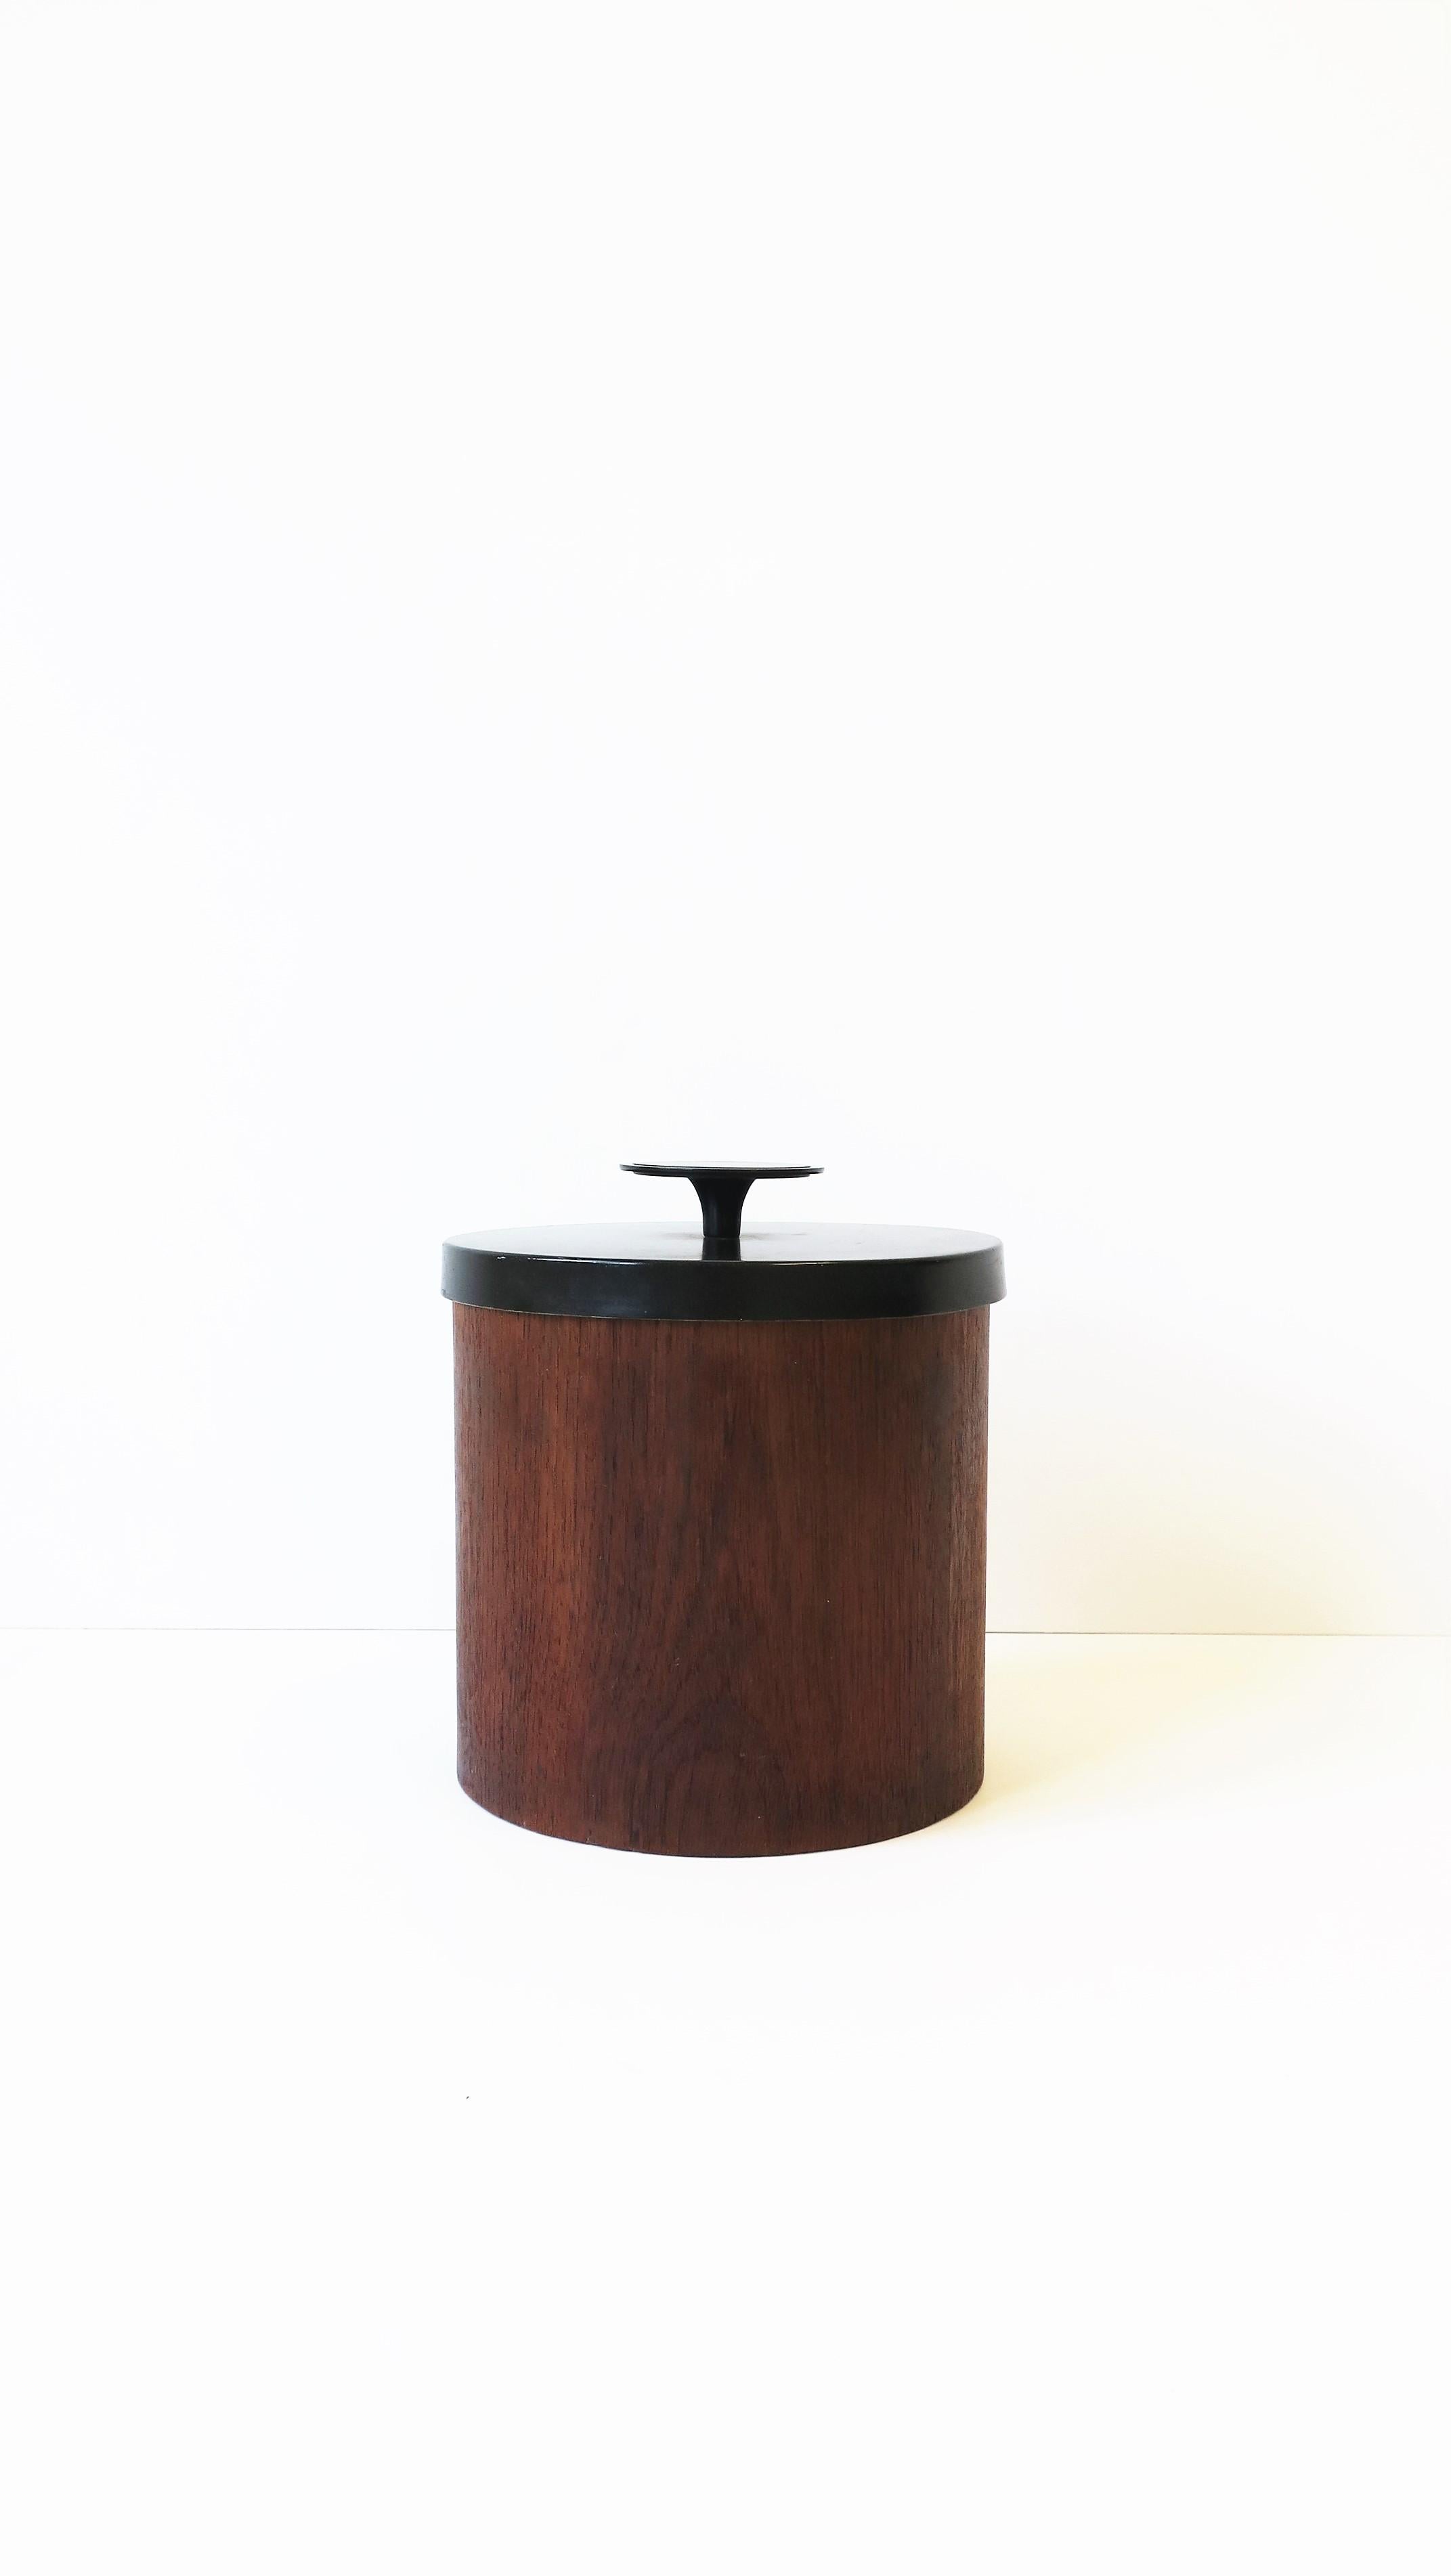 A great Scandinavian Modern ice bucket, circa mid-20th century, Denmark. Ice bucket has a brown teak wood exterior, red plastic interior and a black metal lid with knob. A great piece for any bar, bar cart, entertaining area, etc. Marked 